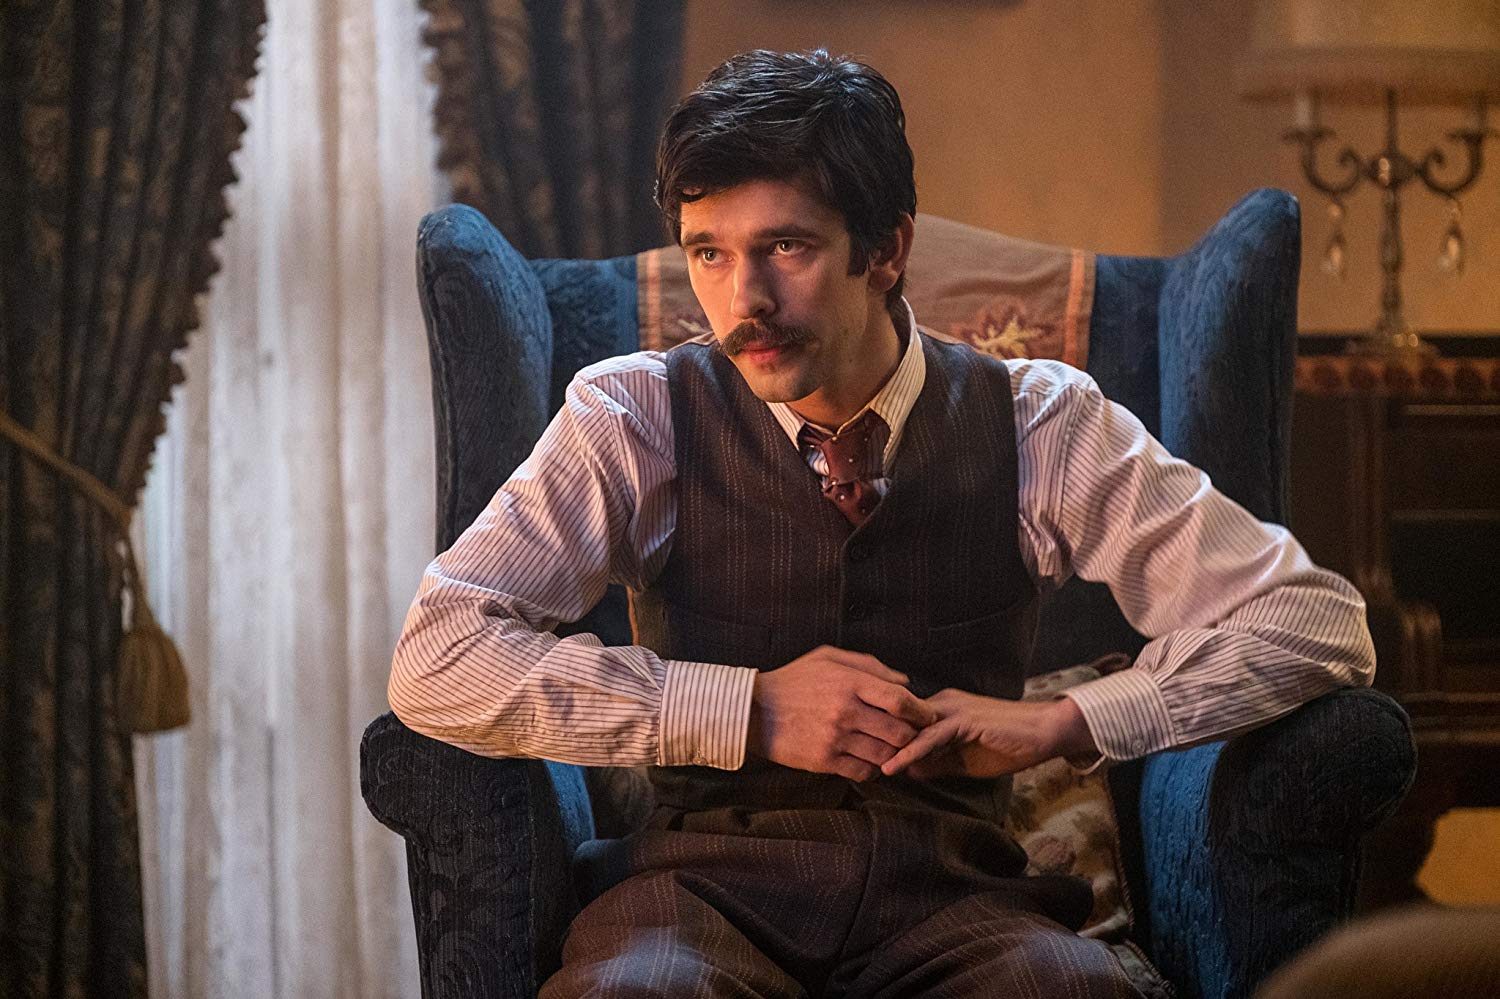 Michael Banks (Ben Whishaw) - Mary Poppins vender tilbage